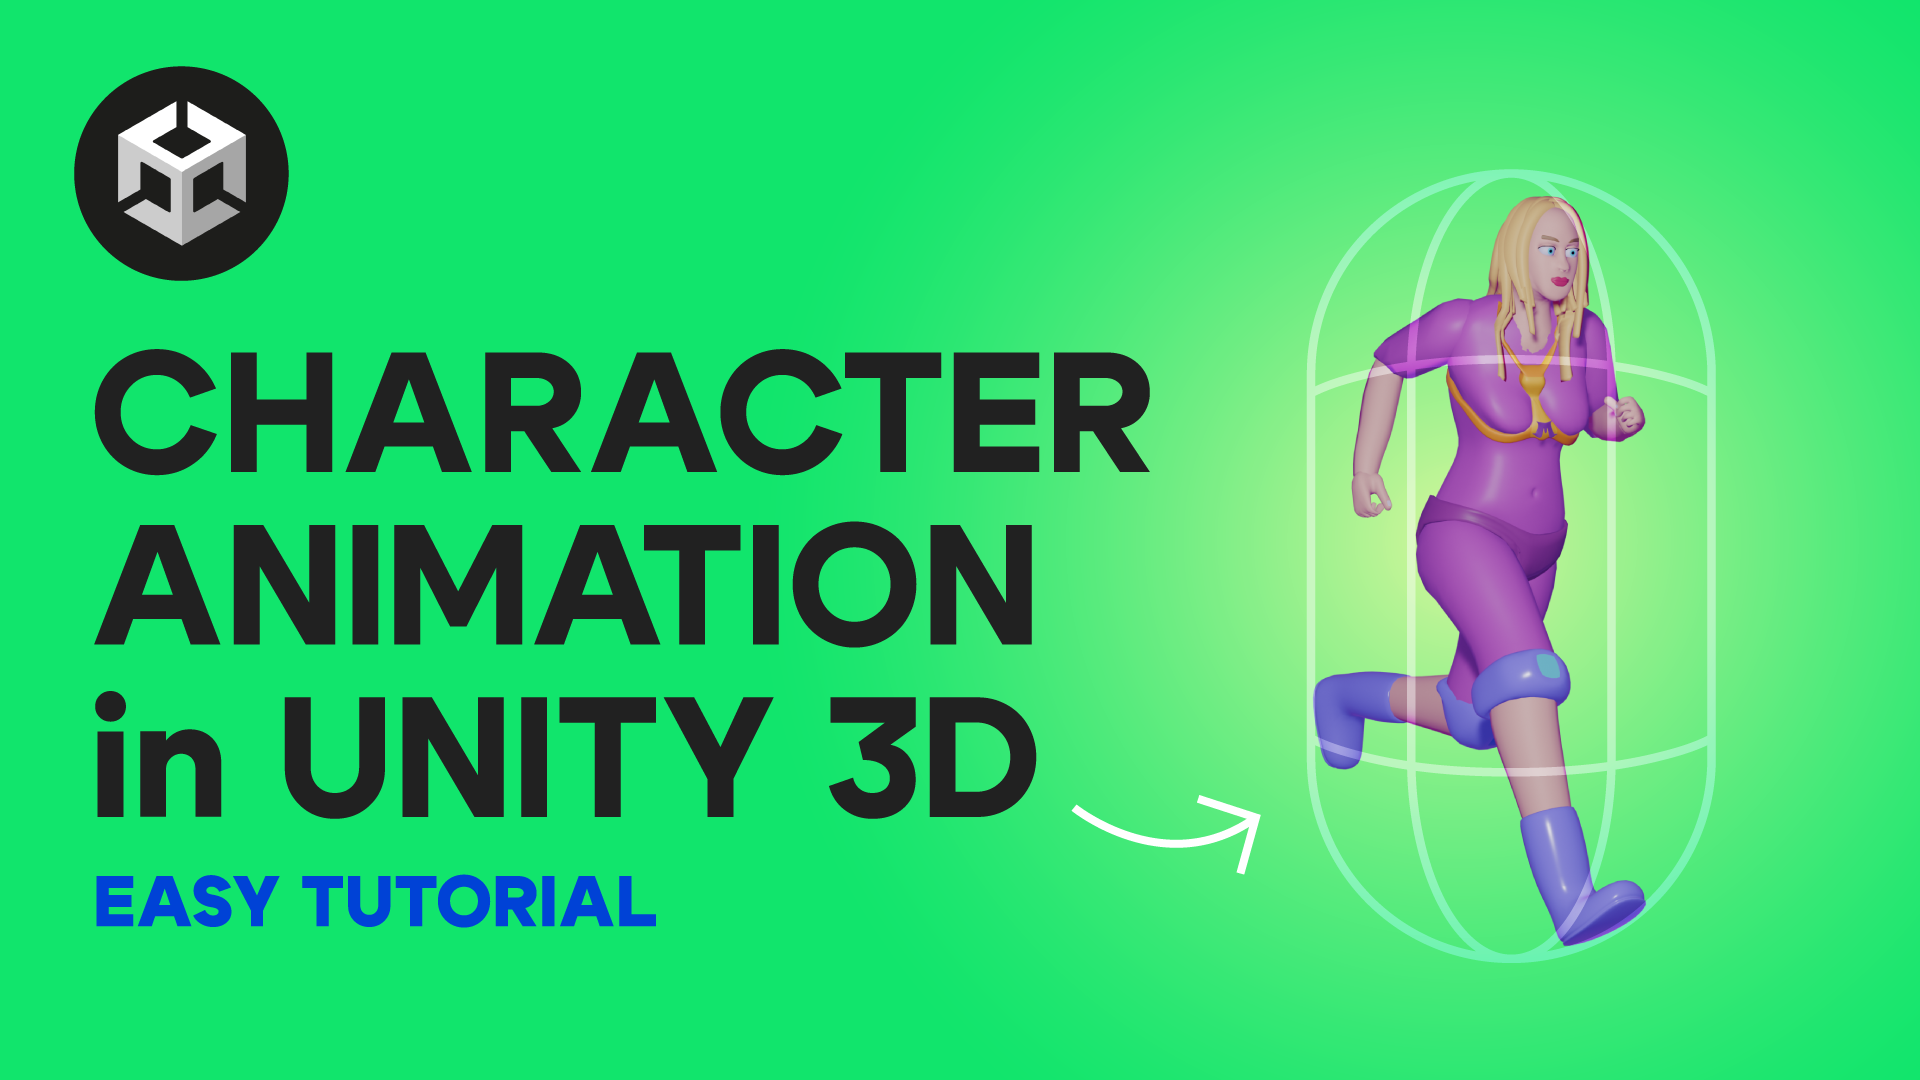 How to Animate a Character in Unity 3D